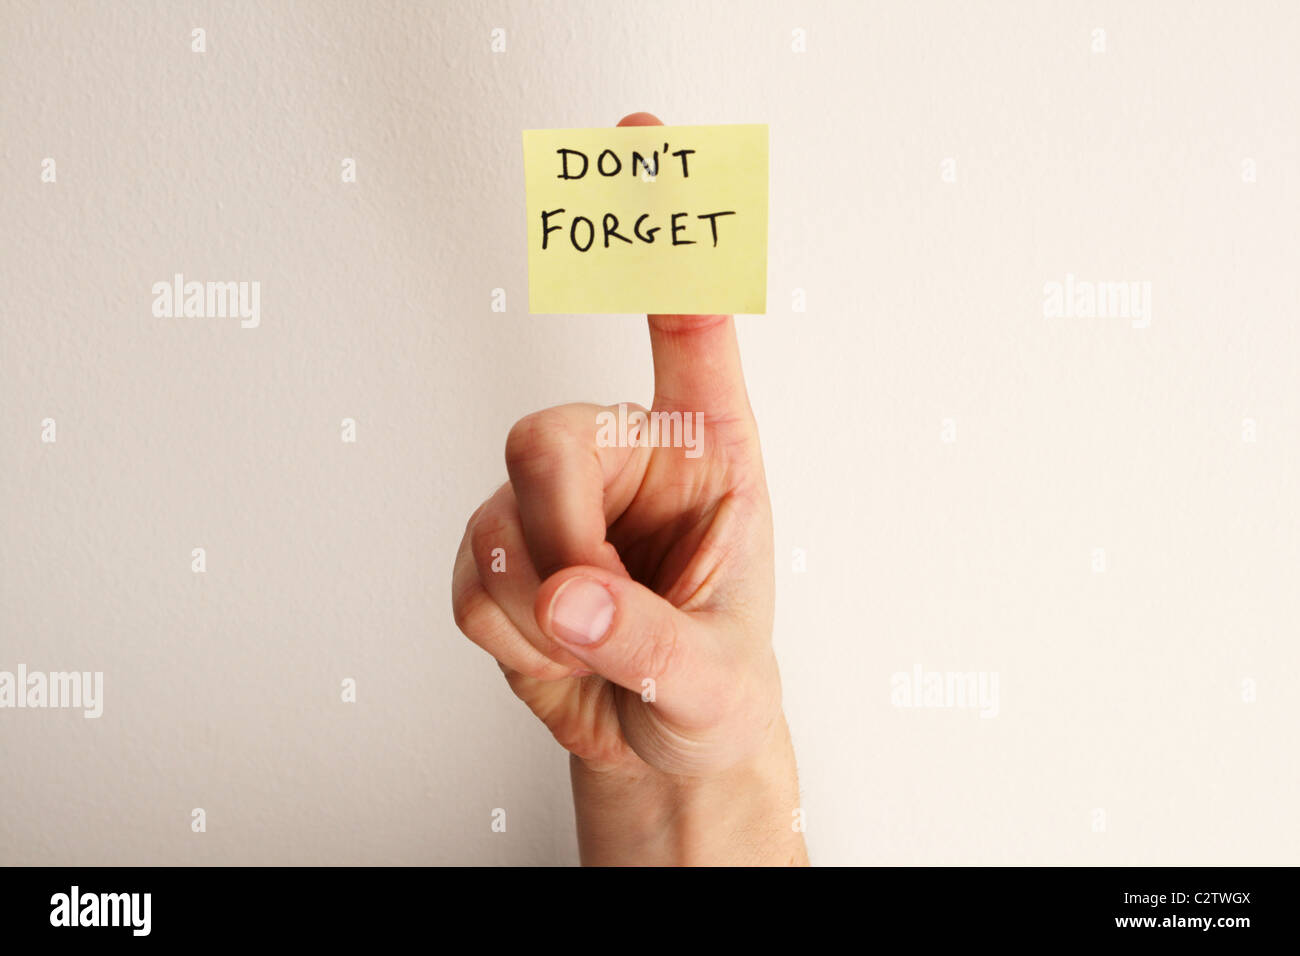 yellow sticky note saying don't forget on a woman's finger with off-white wall background Stock Photo